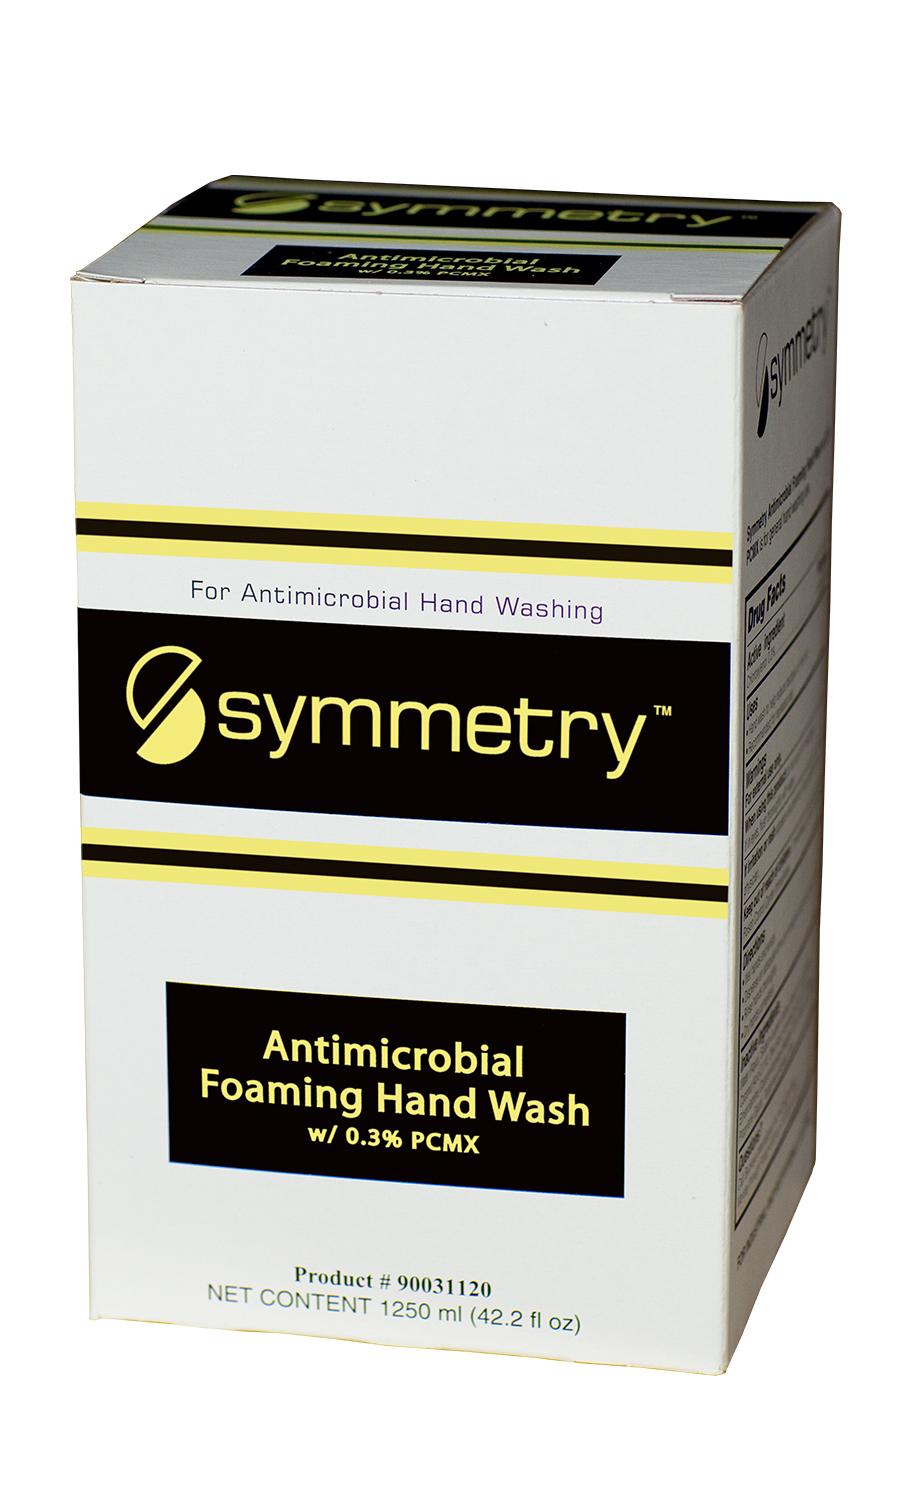 Symmetry Antimicrobial Foaming Hand Wash, 1250 mL Bag, Case of 6